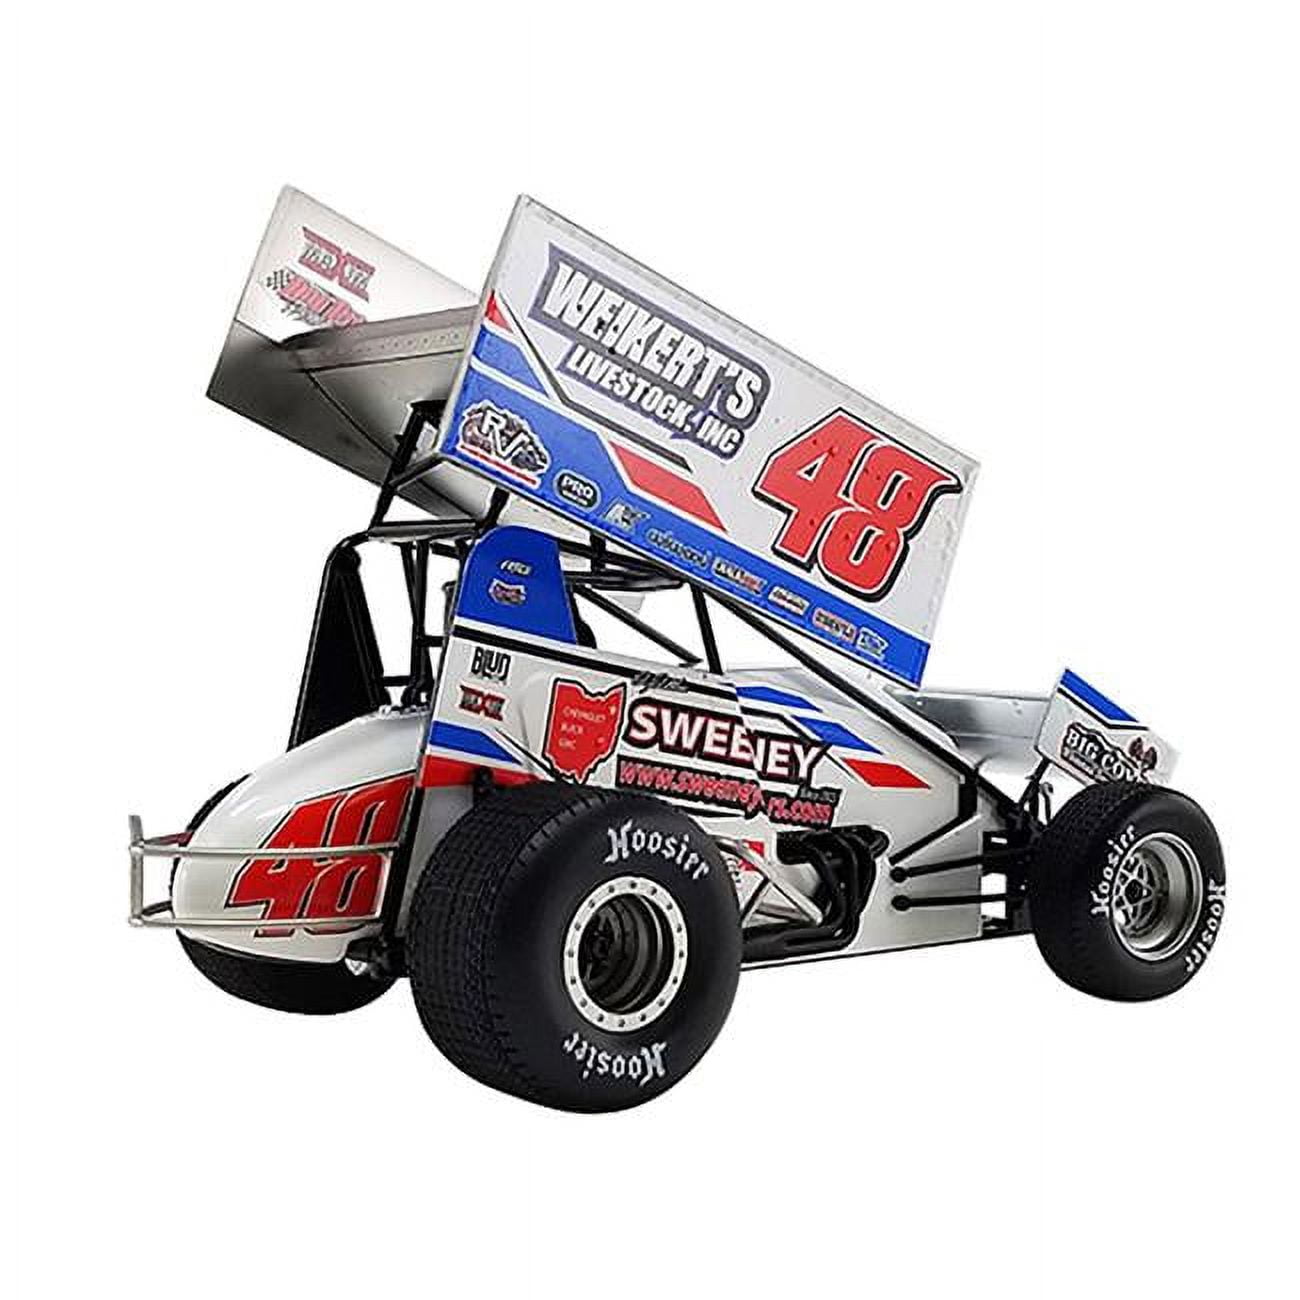 Picture of ACME A1822014 Winged Sprint Car No.48 Danny Dietrich Weikerts Livestock Gary Kauffman Racing World of Outlaws 2022 1 by 18 Scale Diecast Model Car